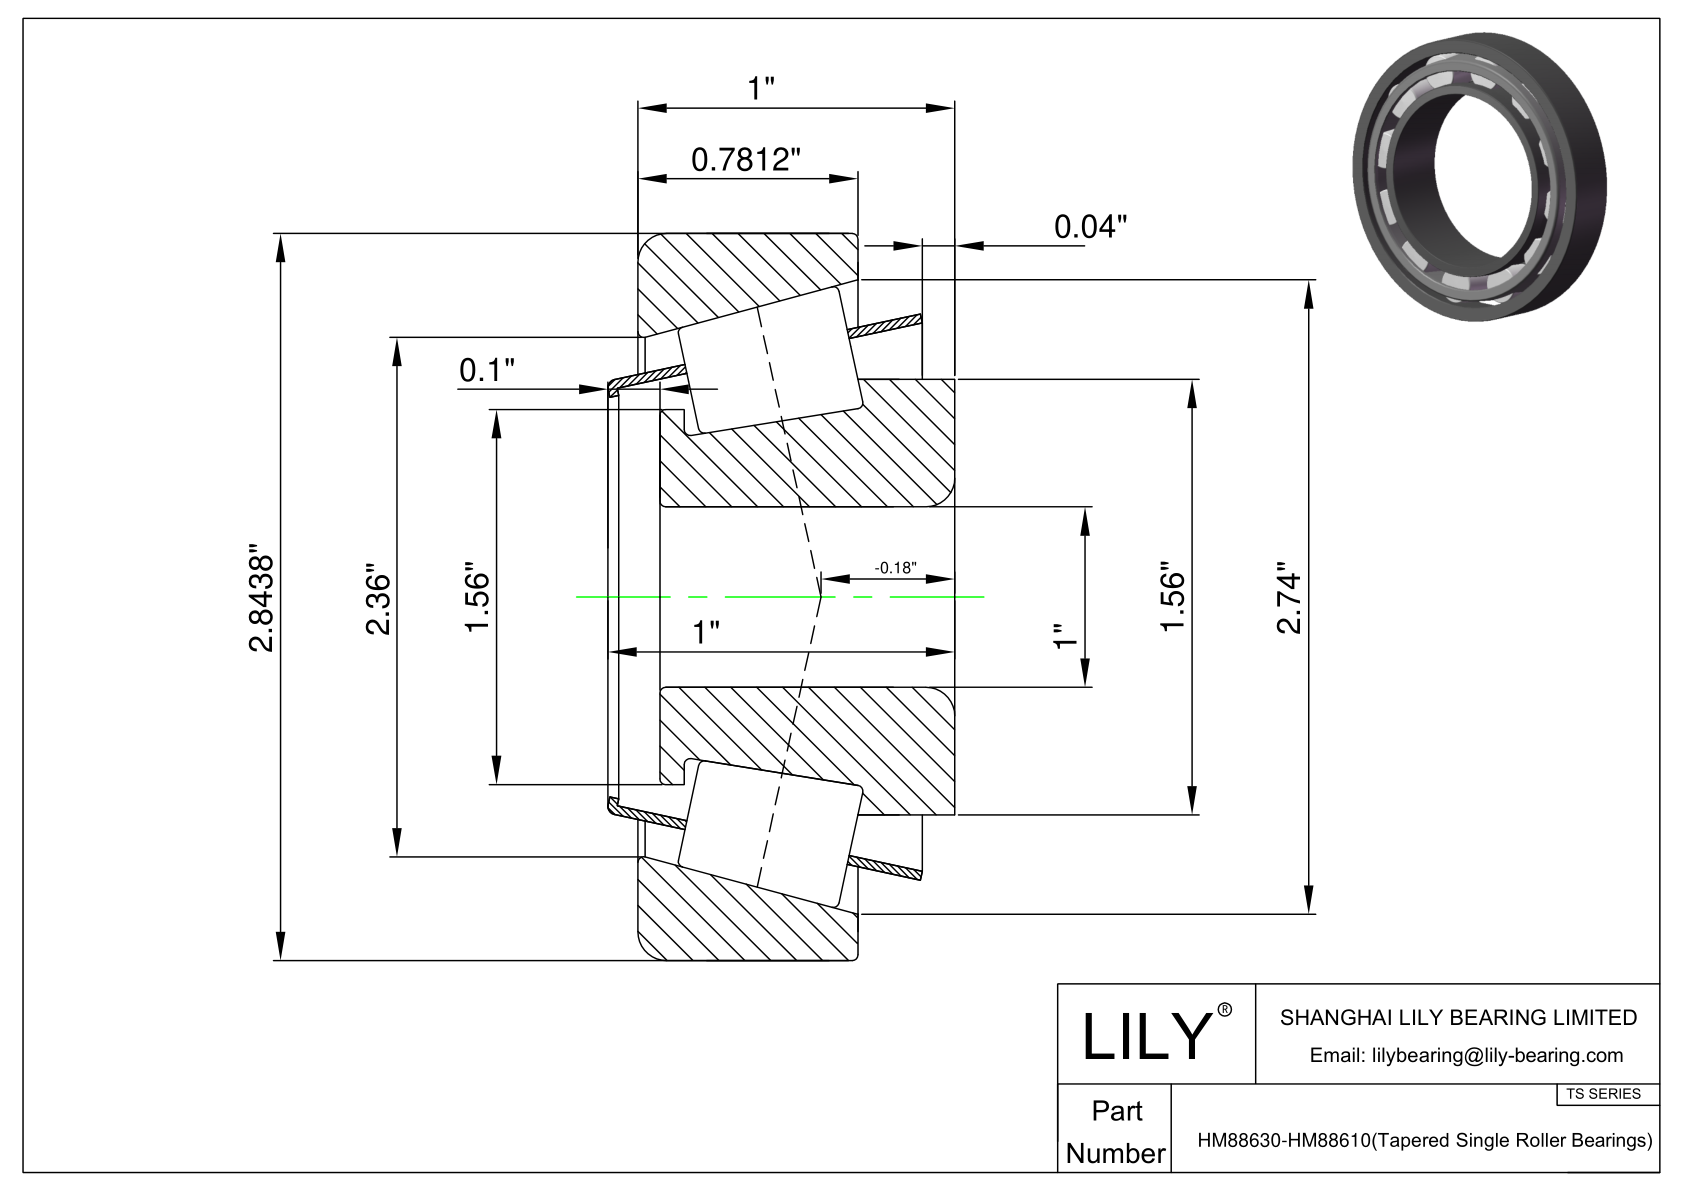 HM88630-HM88610 TS (Tapered Single Roller Bearings) (Imperial) cad drawing